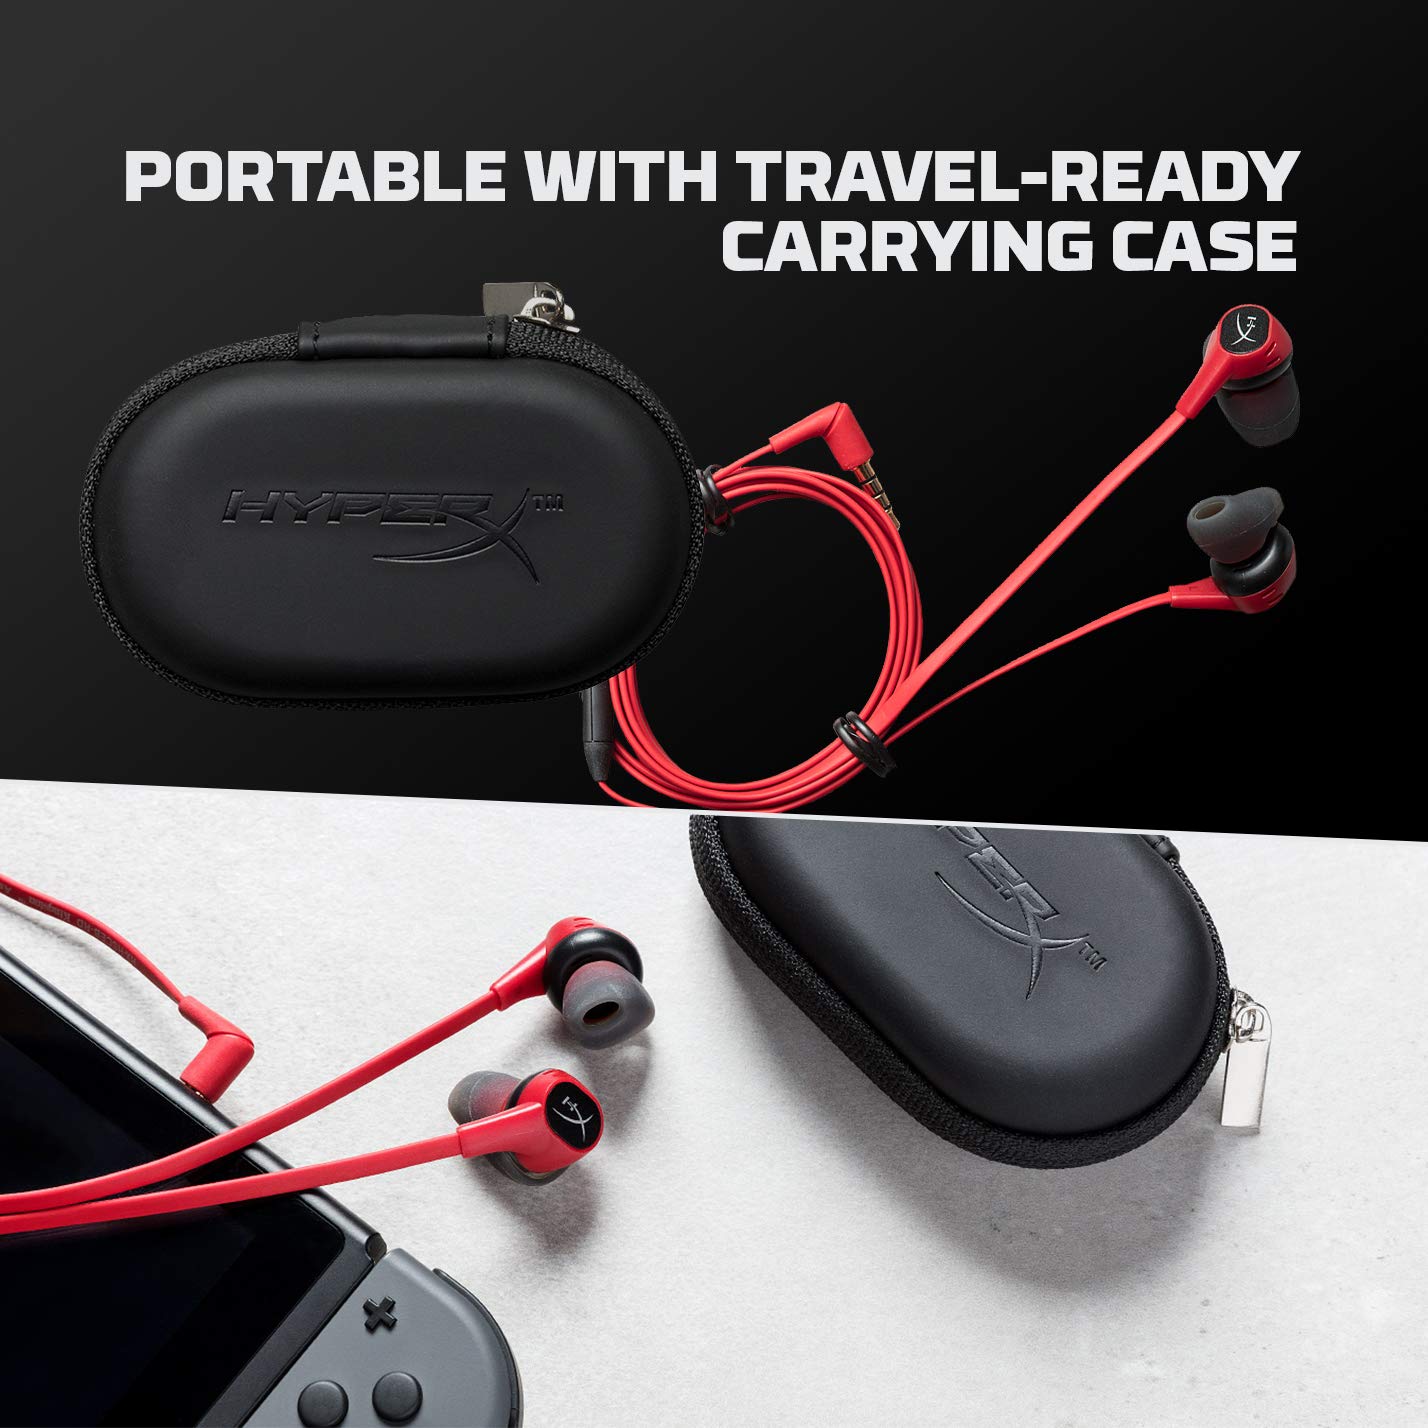 HyperX HX-HSCEB-RD Cloud Earbuds for Nintendo Switch, PC and CTIA mobile phones , Red